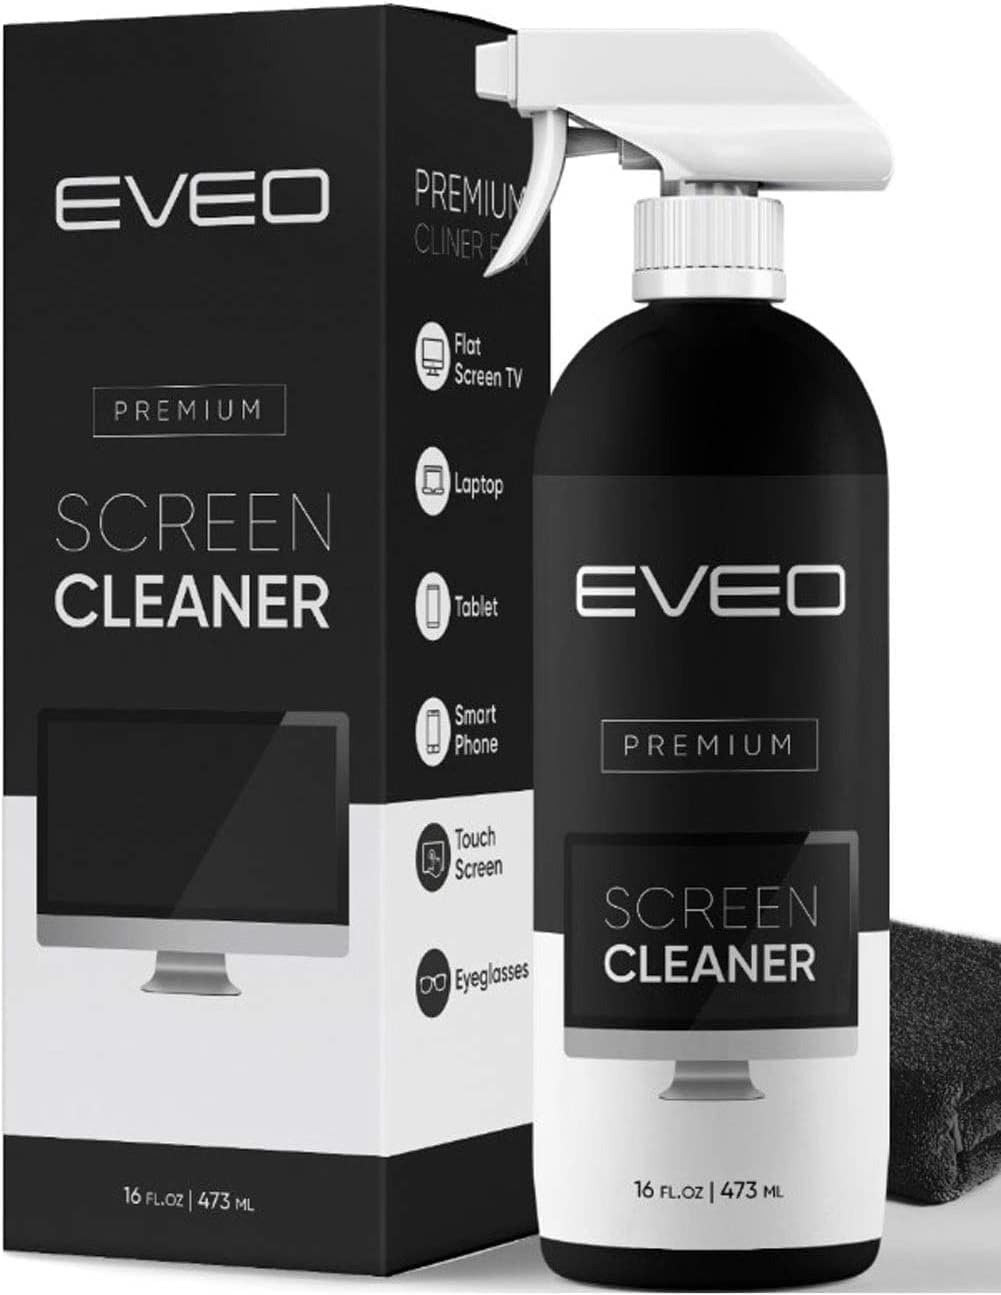 Screen Cleaner Spray (16oz) - Large Screen Cleaner [...]